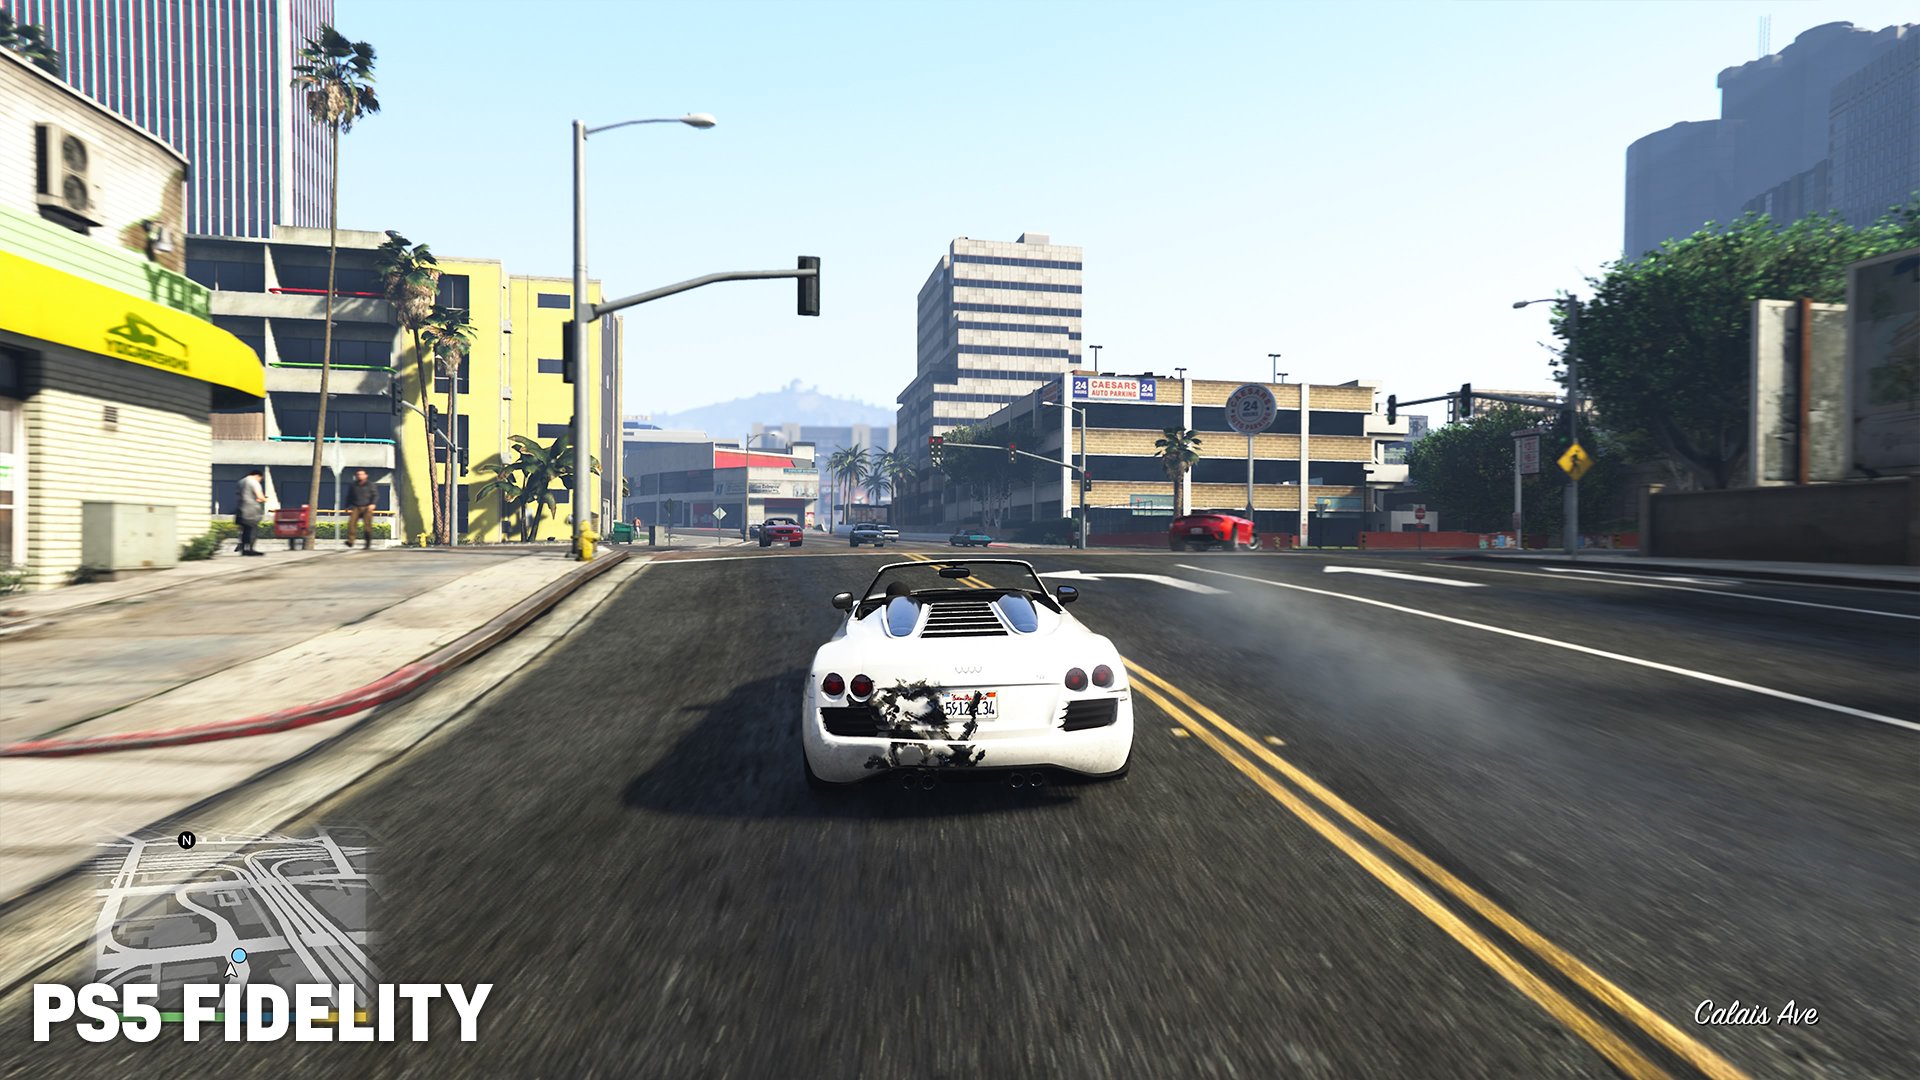 GTA Online PS5 Review: The Best Way To Play